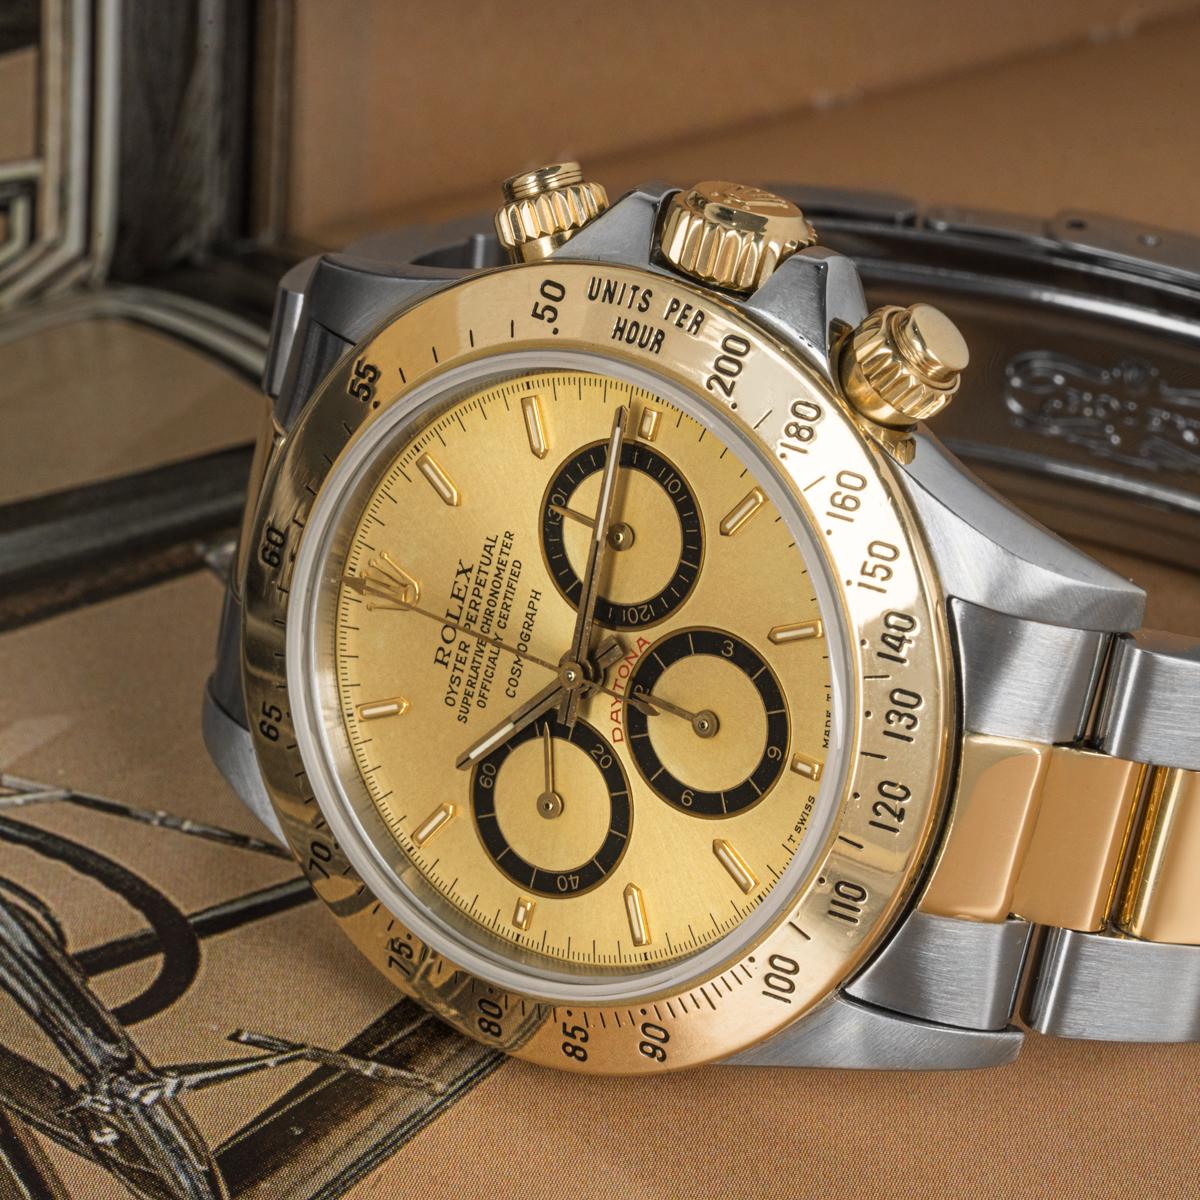 A Rare Stainless Steel and 18k Yellow Gold Oyster Perpetual Zenith Movement Cosmograph Daytona Men's Wristwatch, rare Mark I floating champagne dial with applied hour markers, 30 minute recorder at 3 0'clock, 12 hour recorder with inverted 6 at 6